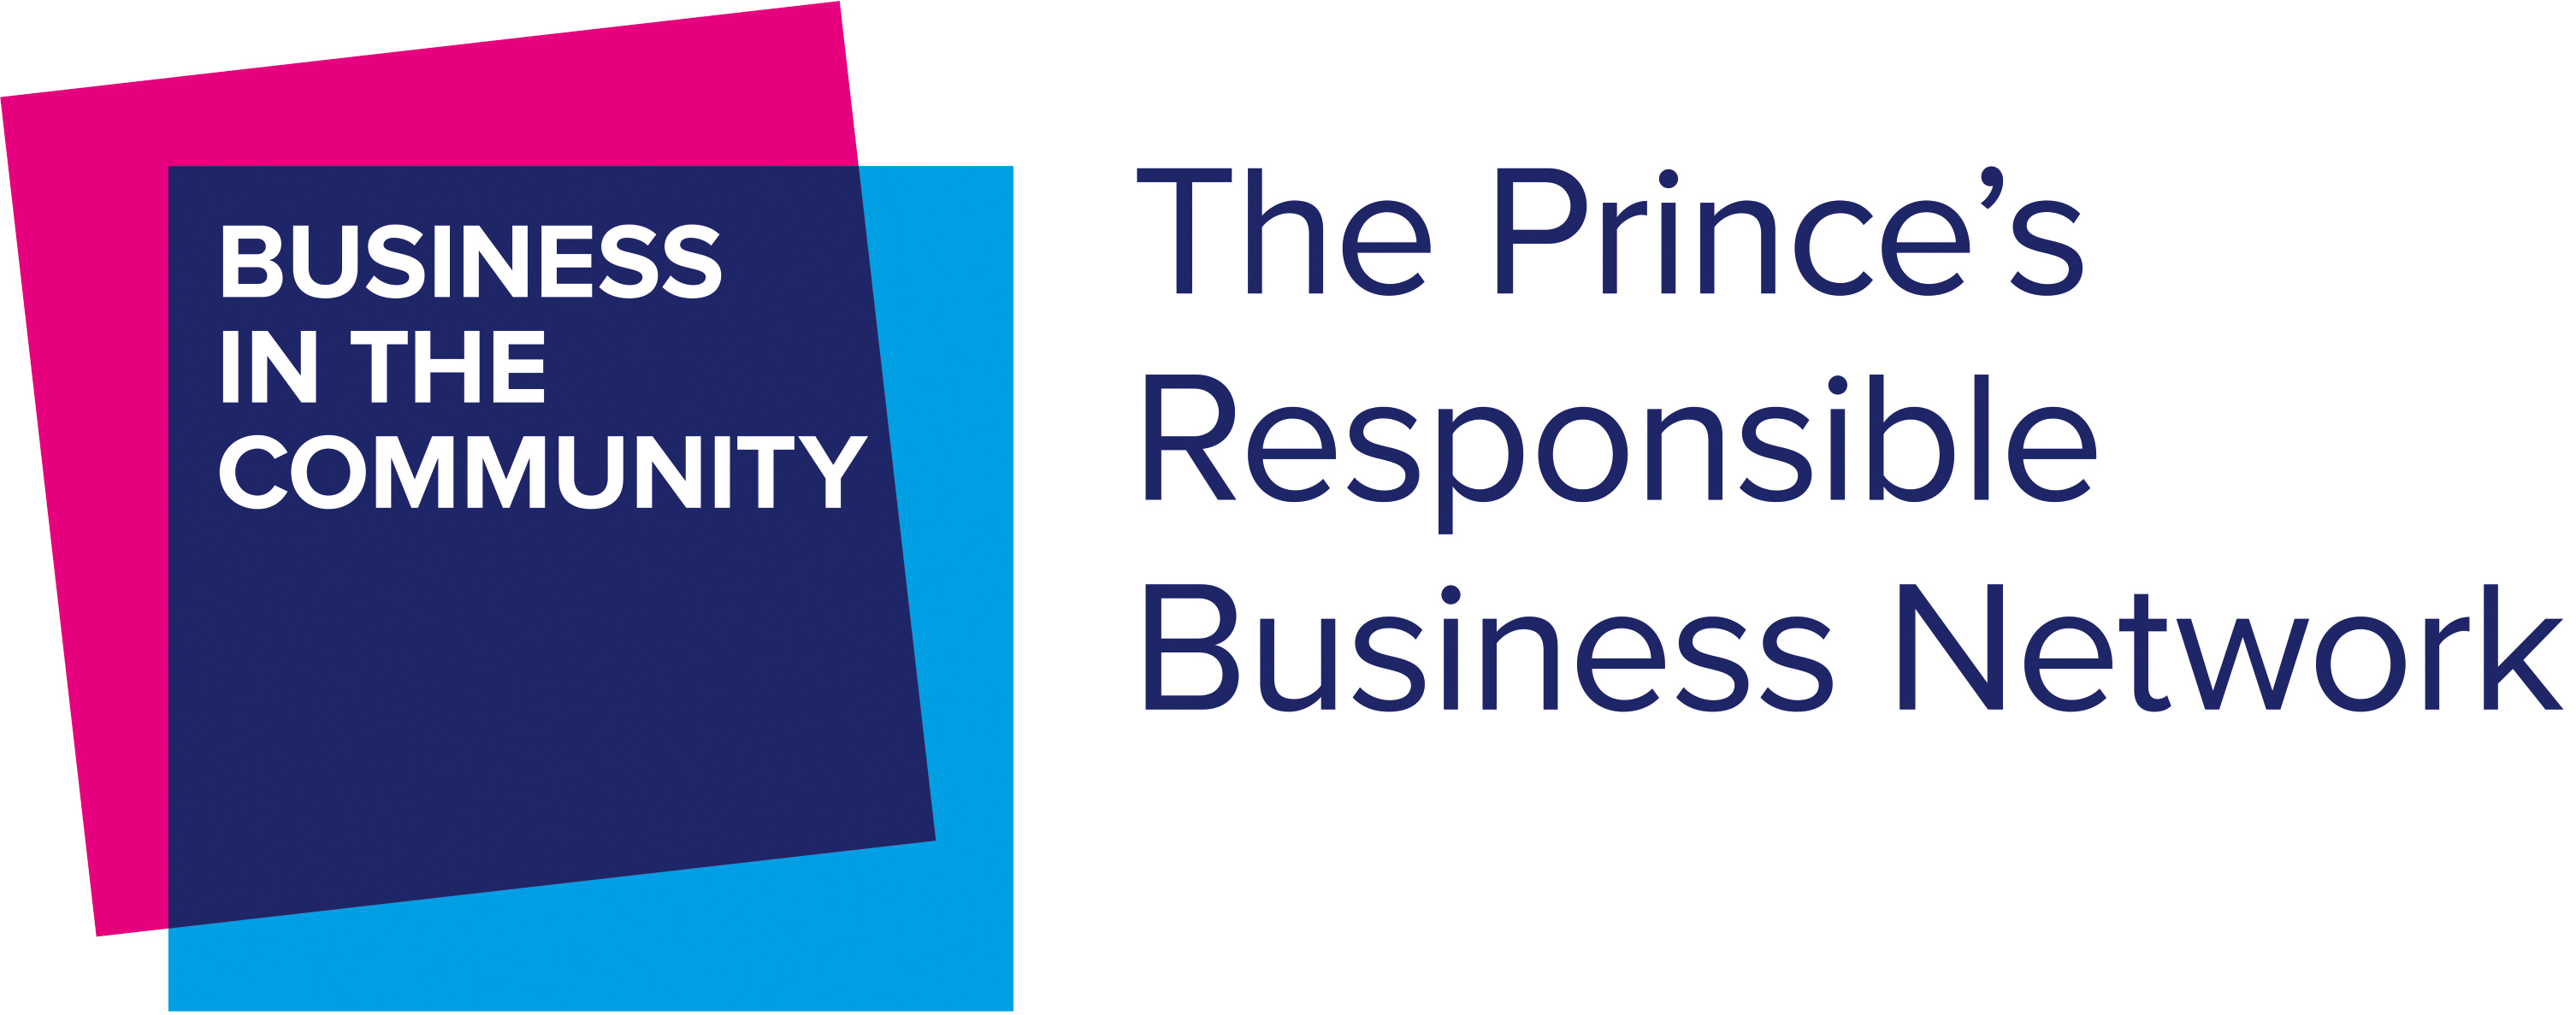 Business in the community - The Princes responsible buisness network